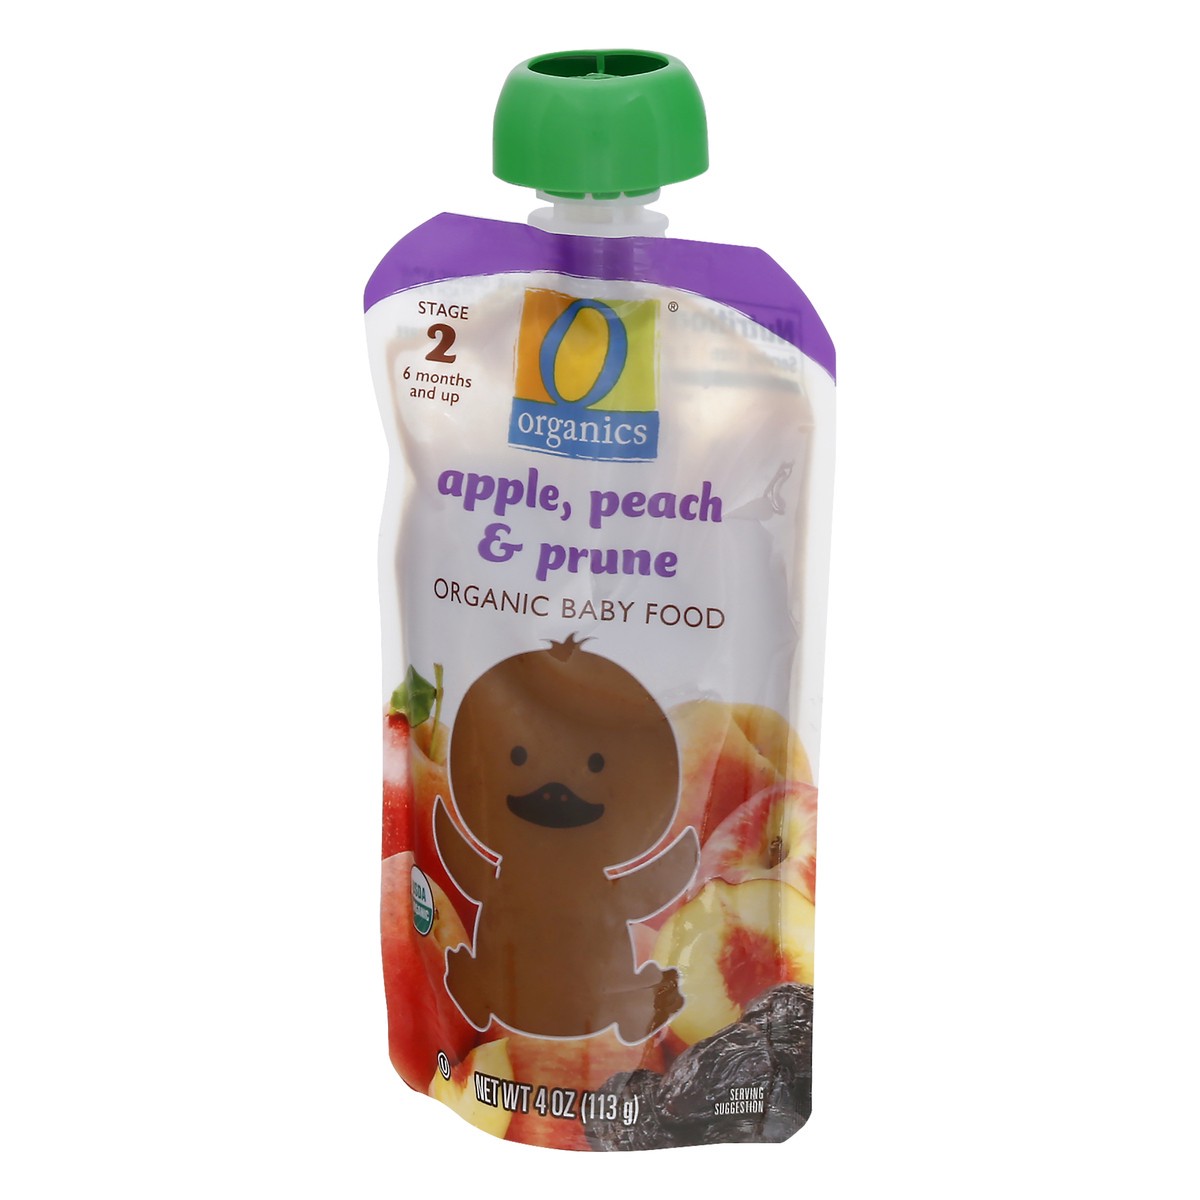 slide 1 of 9, Organics Stage 2 (6 Months and Up) Organic Apple, Peach & Prune Baby Food 4.0 oz, 4 oz